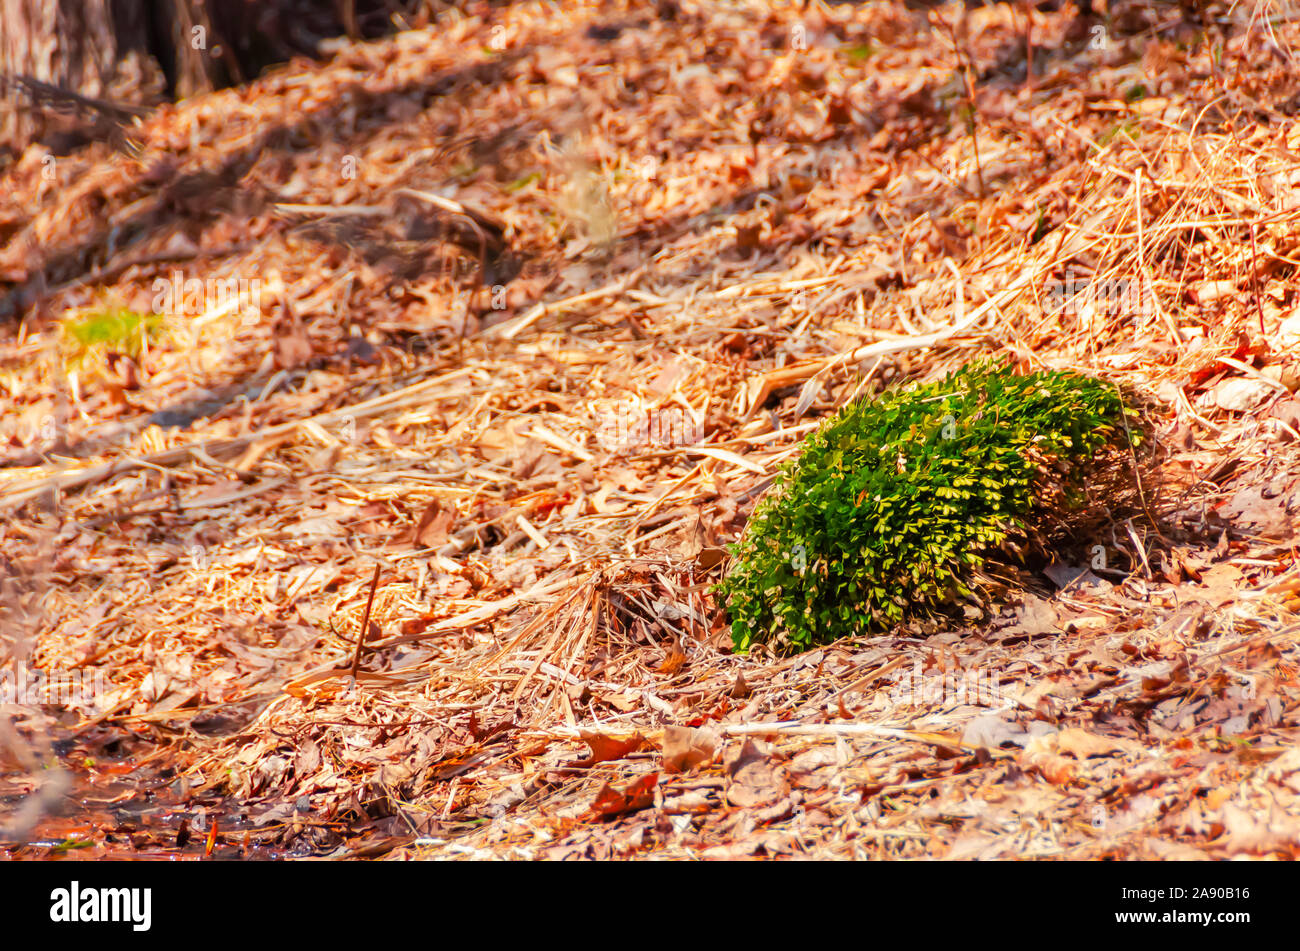 A wild bushy shrub in a forest floor in a sea of dead leaves, twigs and branches. Stock Photo